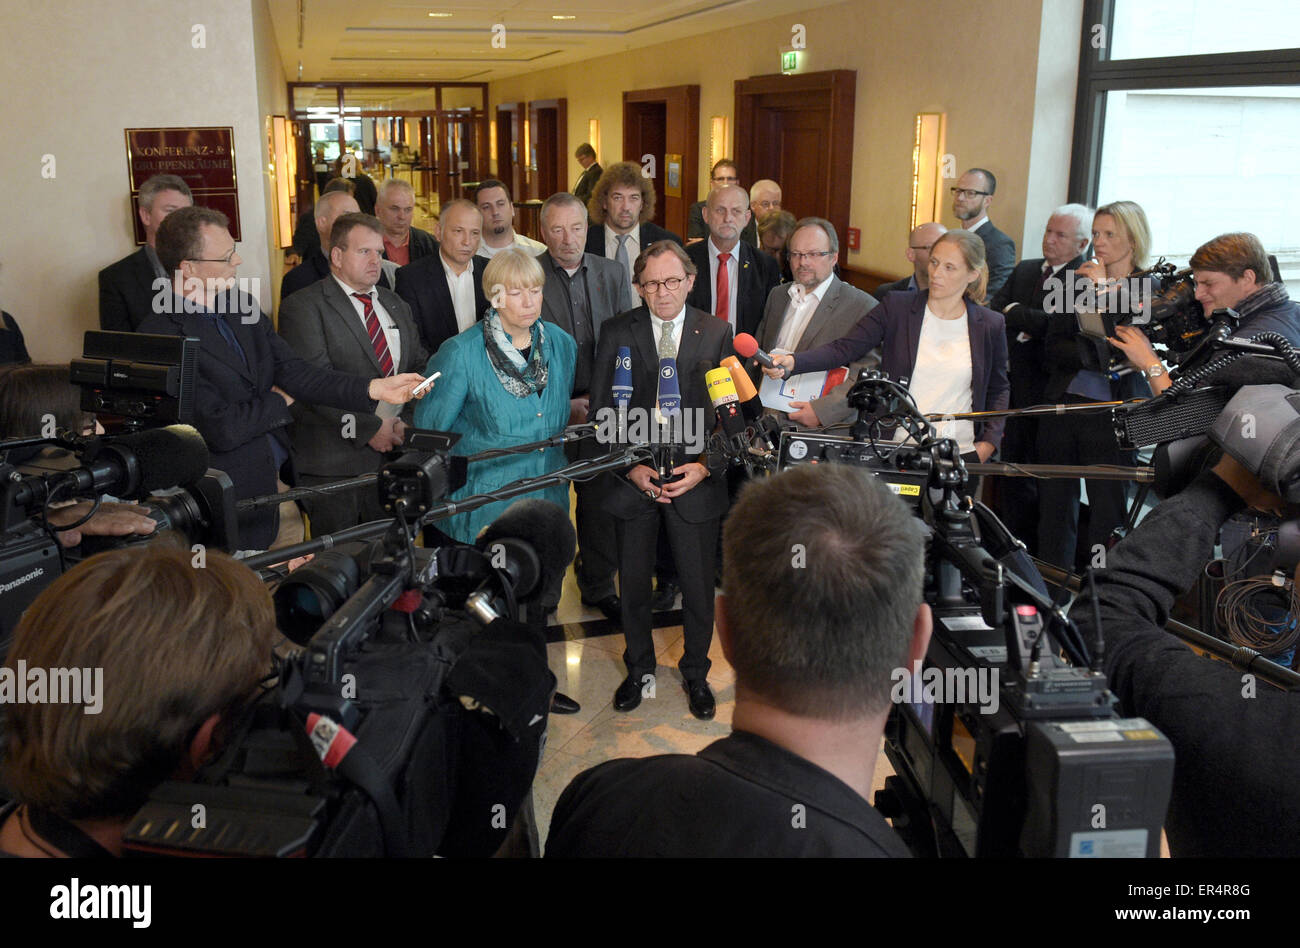 Berlin, Germany. 27th May, 2015. Deputy Chairman of the Railway and Transport Union (EVG) Regina Rusch-Ziemba (C, L) and Chief Human Resources Officer of Deutsche Bahn AG Ulrich Weber (C, R) speak to members of the press in Berlin, Germany, 27 May 2015. Deutsche Bahn and the EVG have reached an agreement on labour provisions. Photo: Rainer Jensen/dpa/Alamy Live News Stock Photo